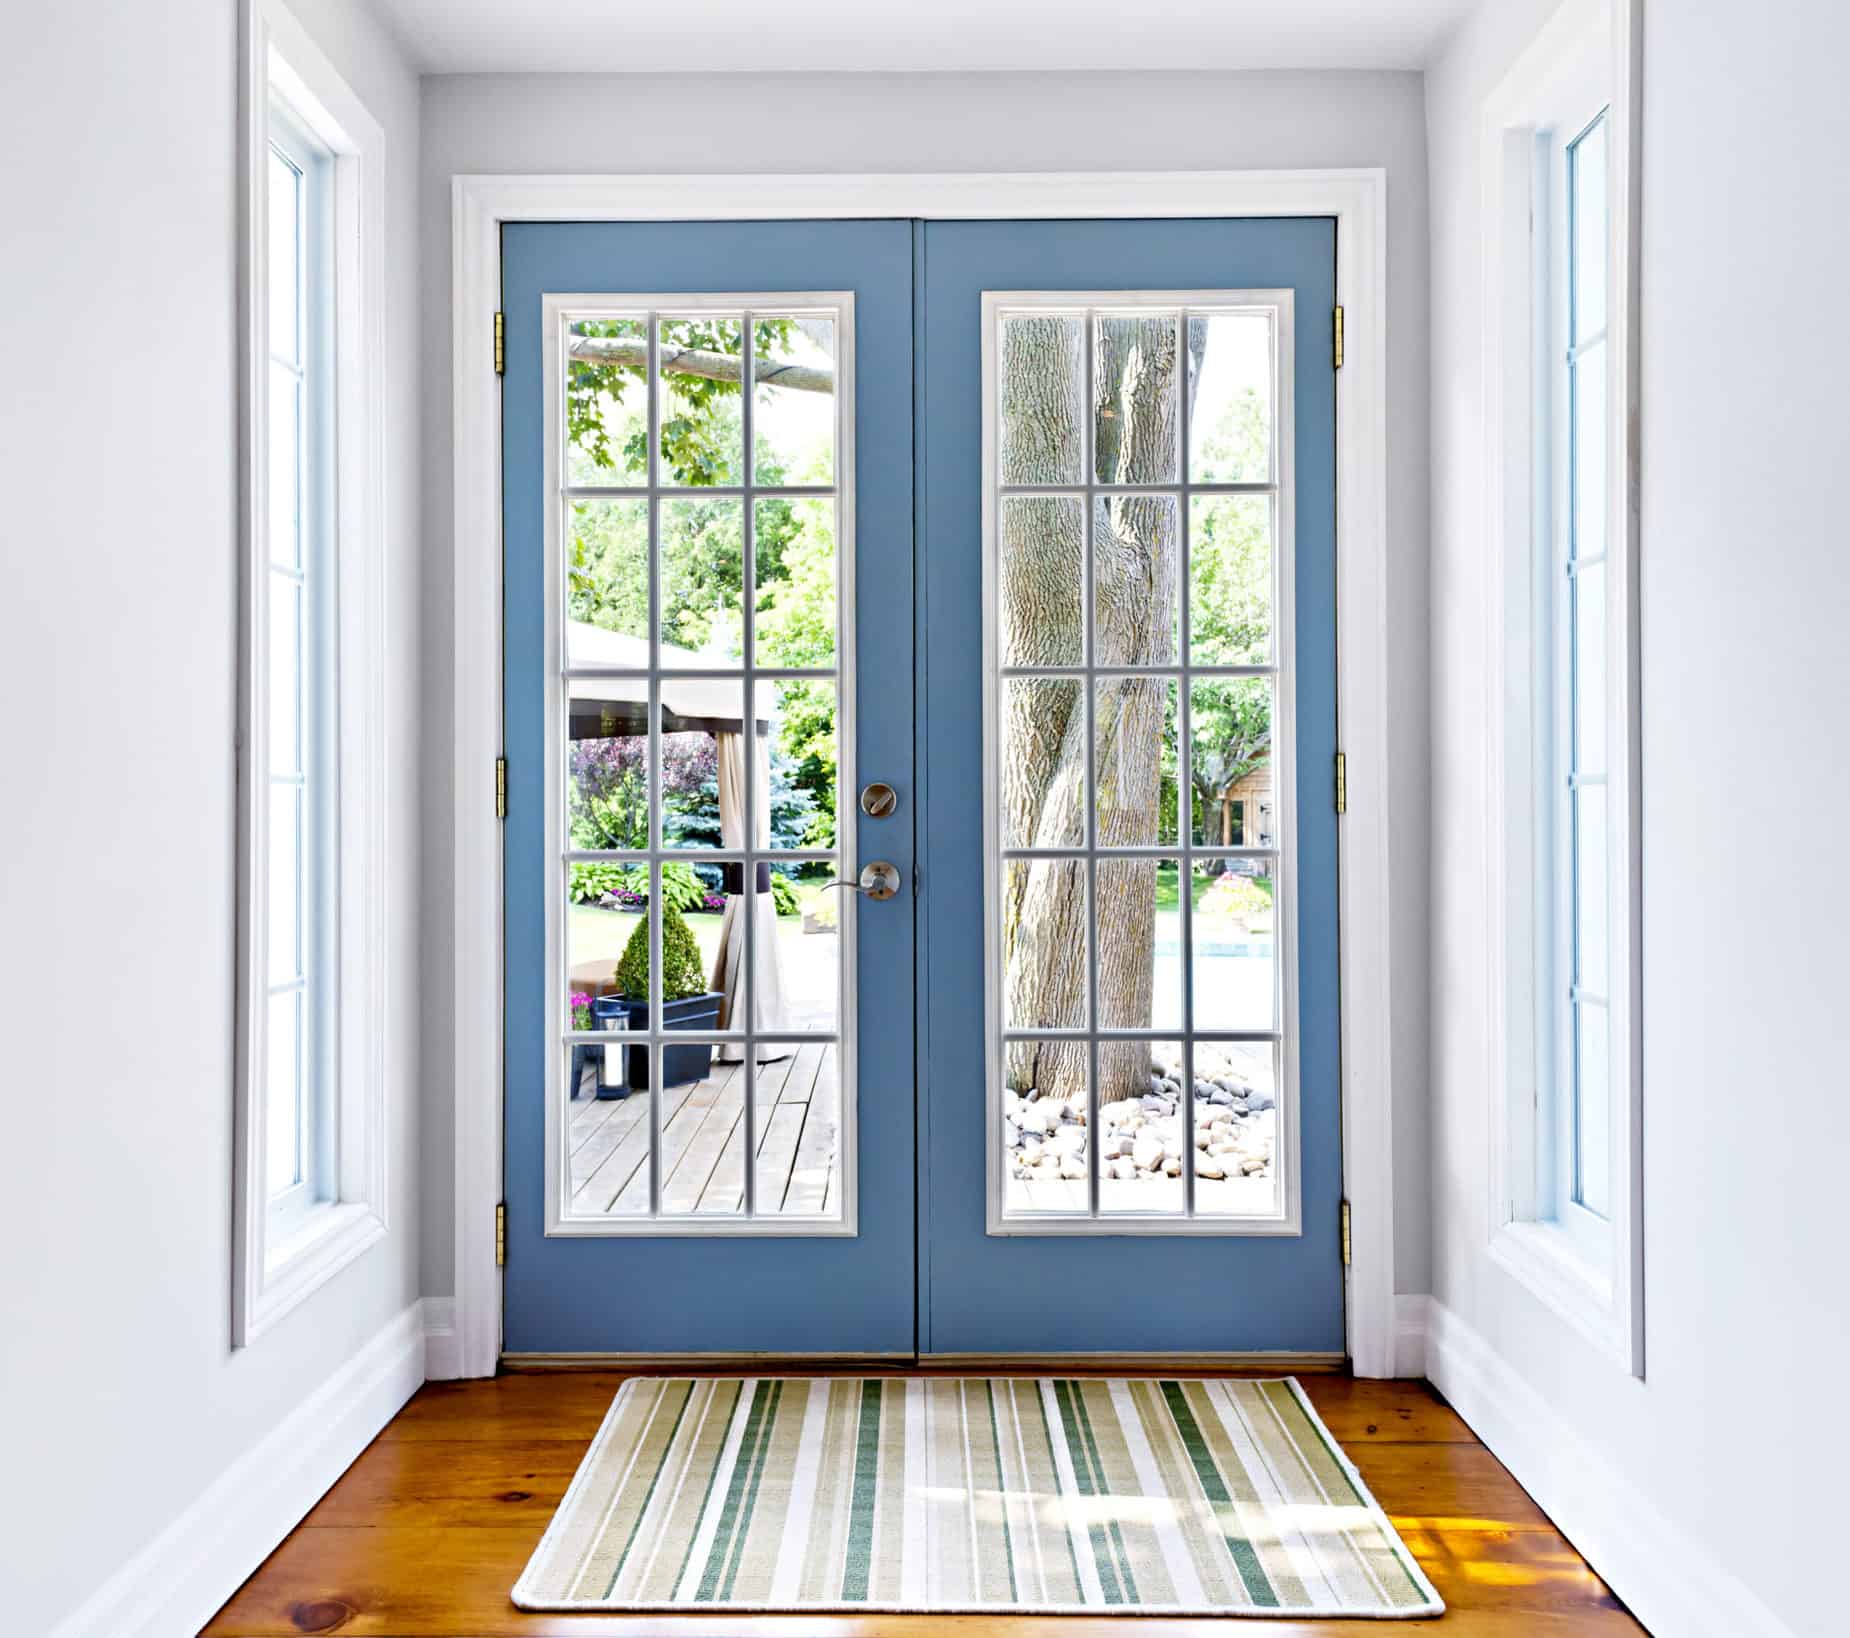 Why use french doors for our home?